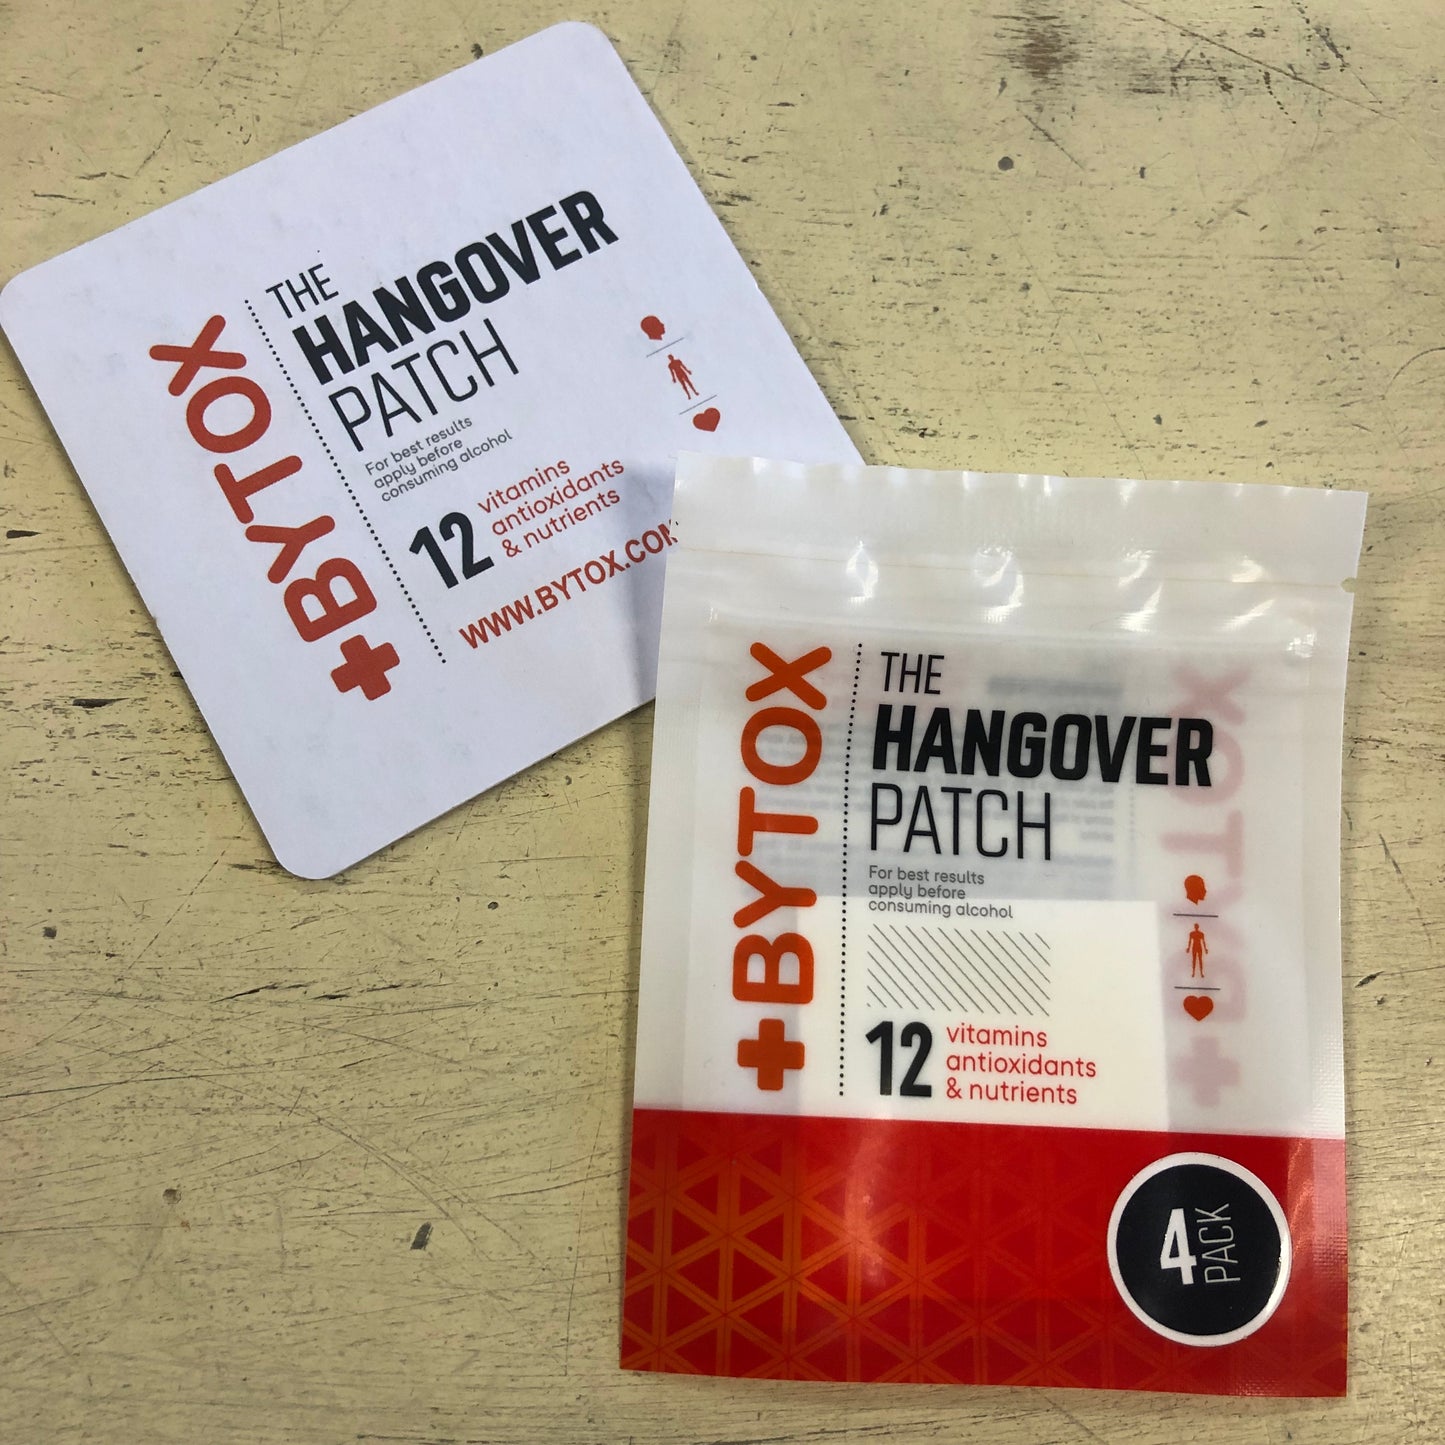 Bytox Hangover Patch Set